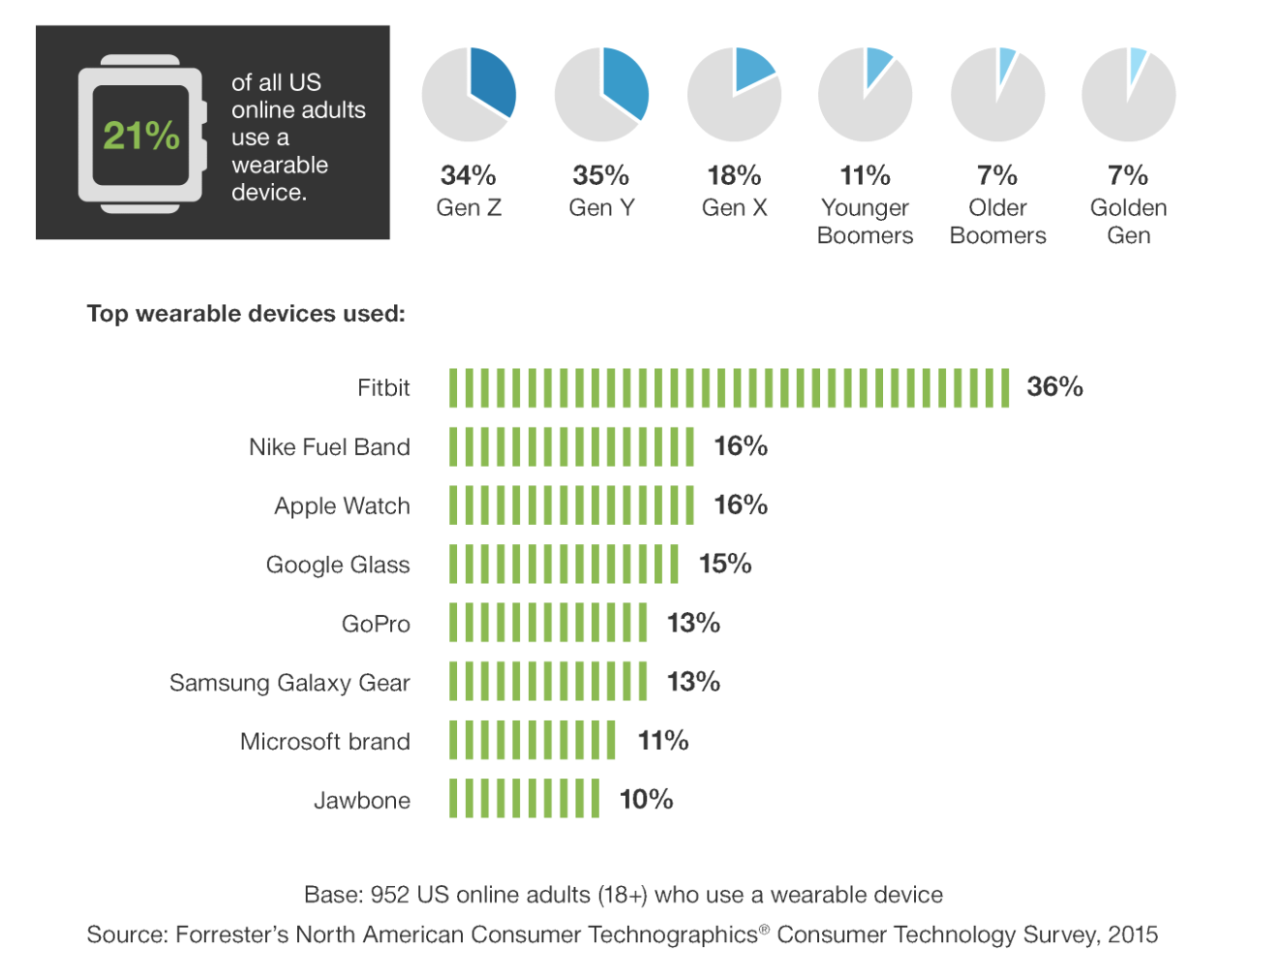 21% Of U.S. Online Adults Use Wearable Device, 36% Use Fitbit